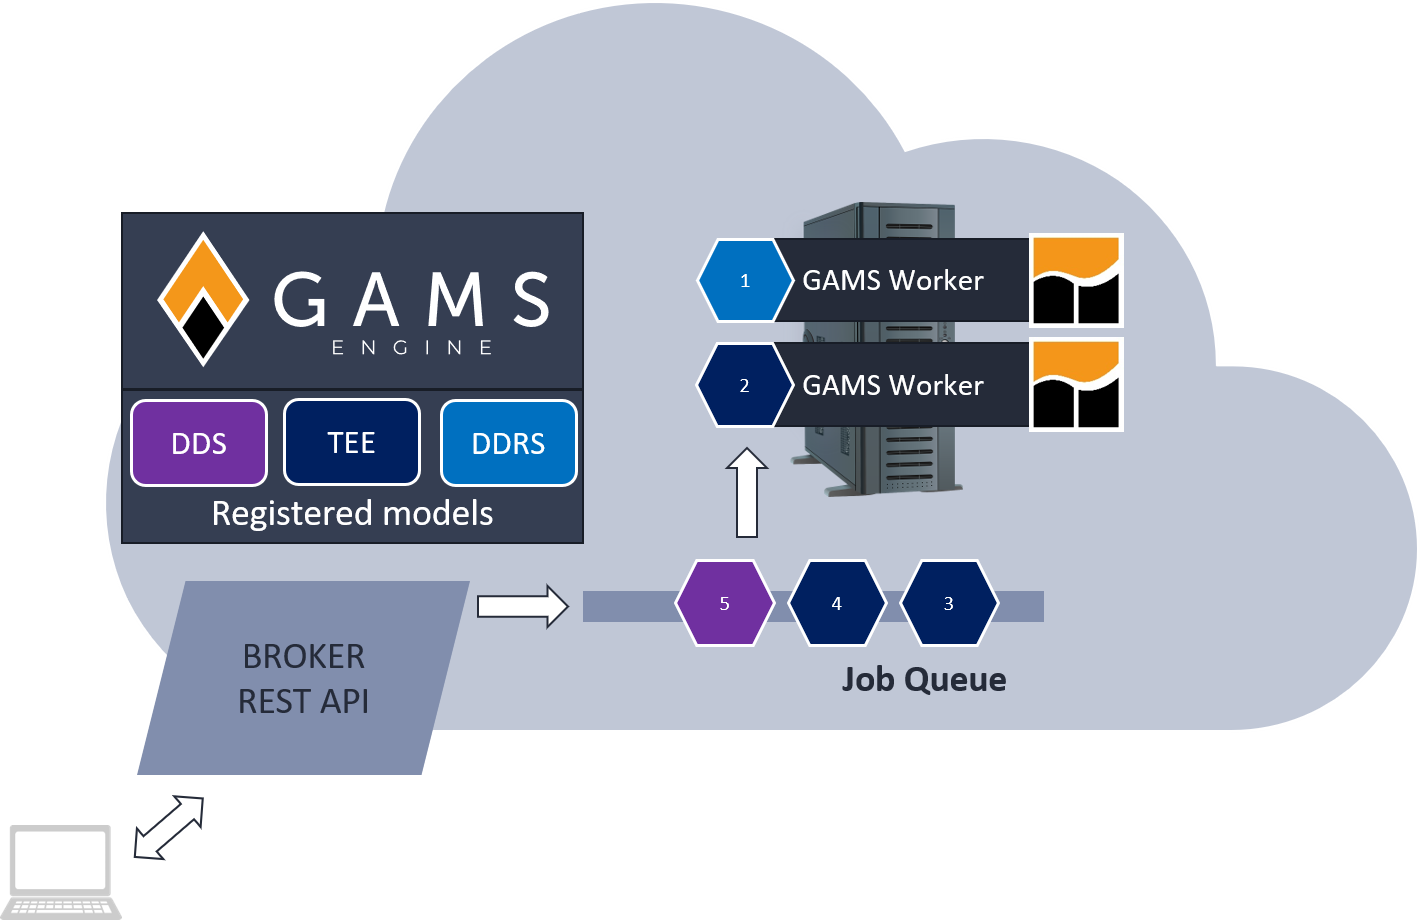 The USMA scheduling algorithms run via GAMS Engine SaaS which is hosted on the AWS cloud infrastructure. The various schedulers are registered with Engine, which means that only input and output data is passed back and forth between the client machines and Engine SaaS.